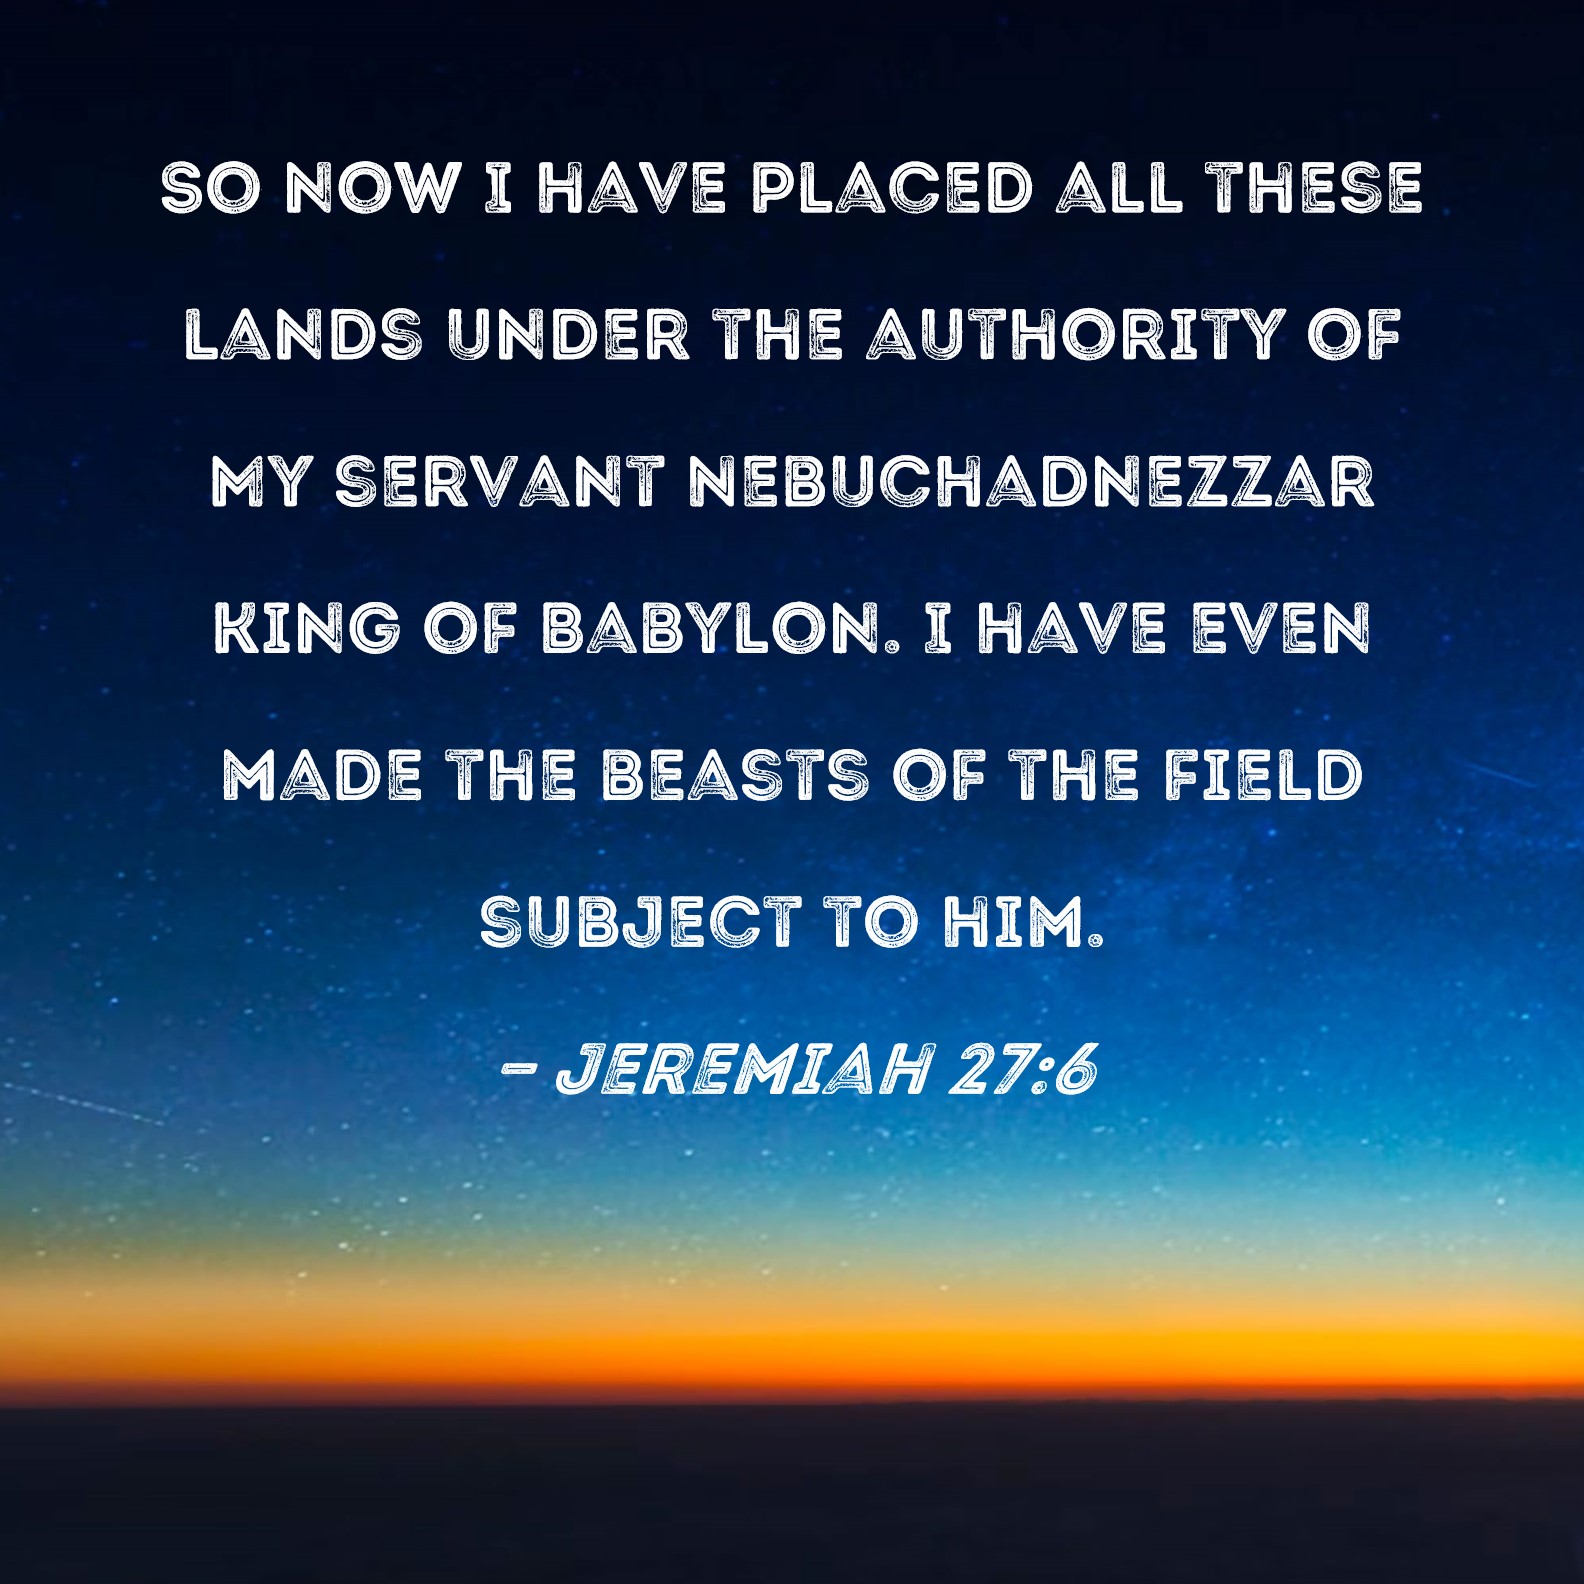 Nebuchadnezzar: Who Was the Biblical King of Men and Beasts?